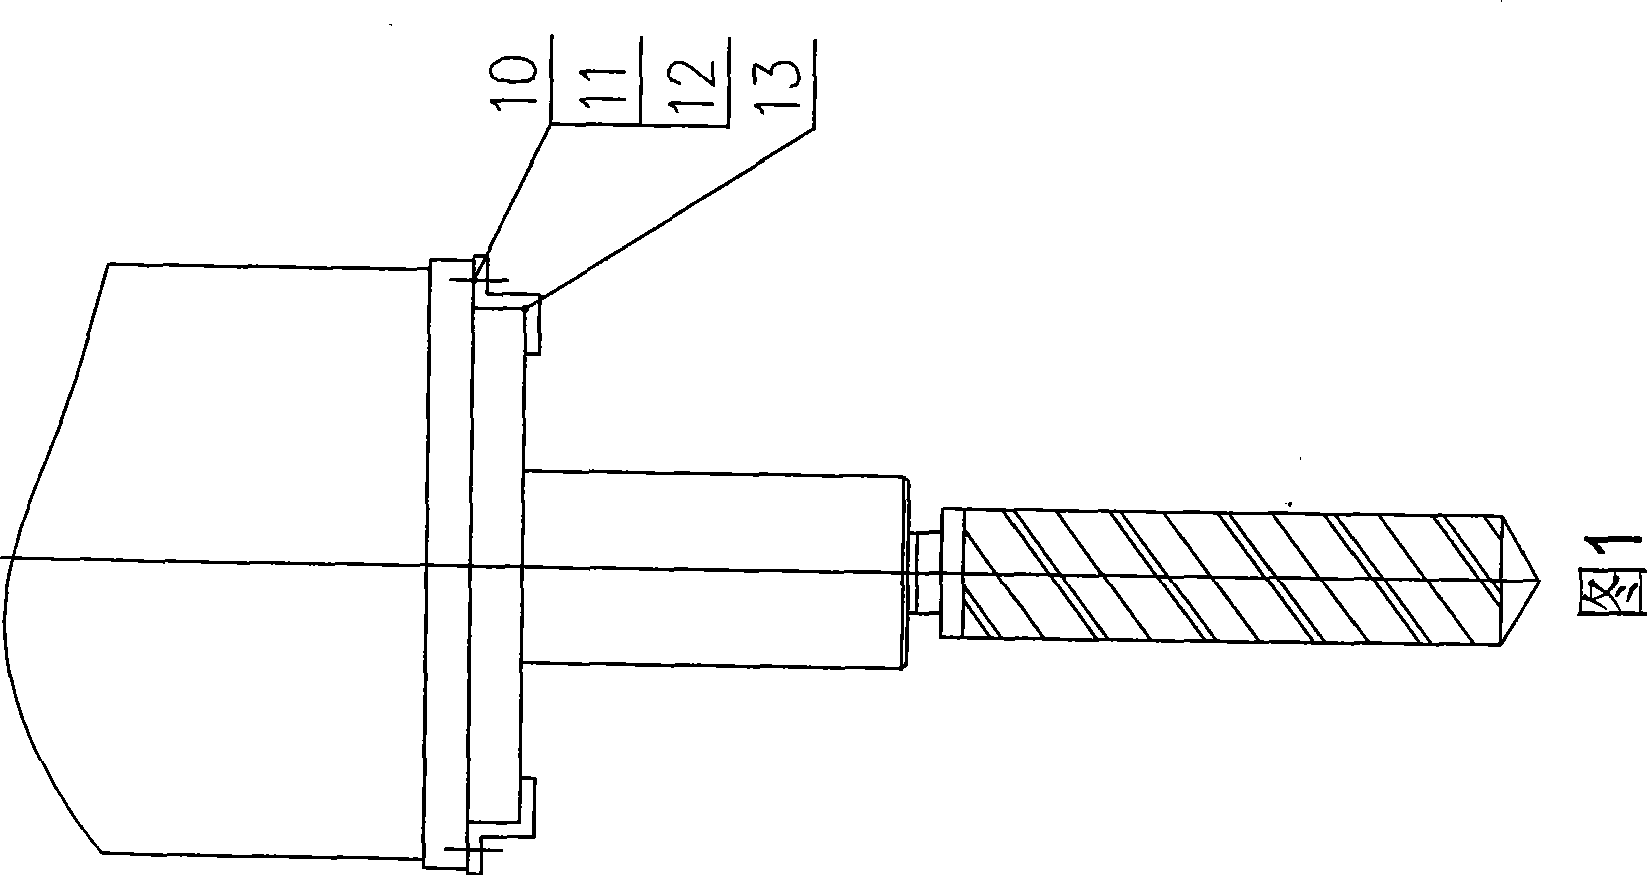 Gap-adjusting structure of high-accuracy numerical control drill